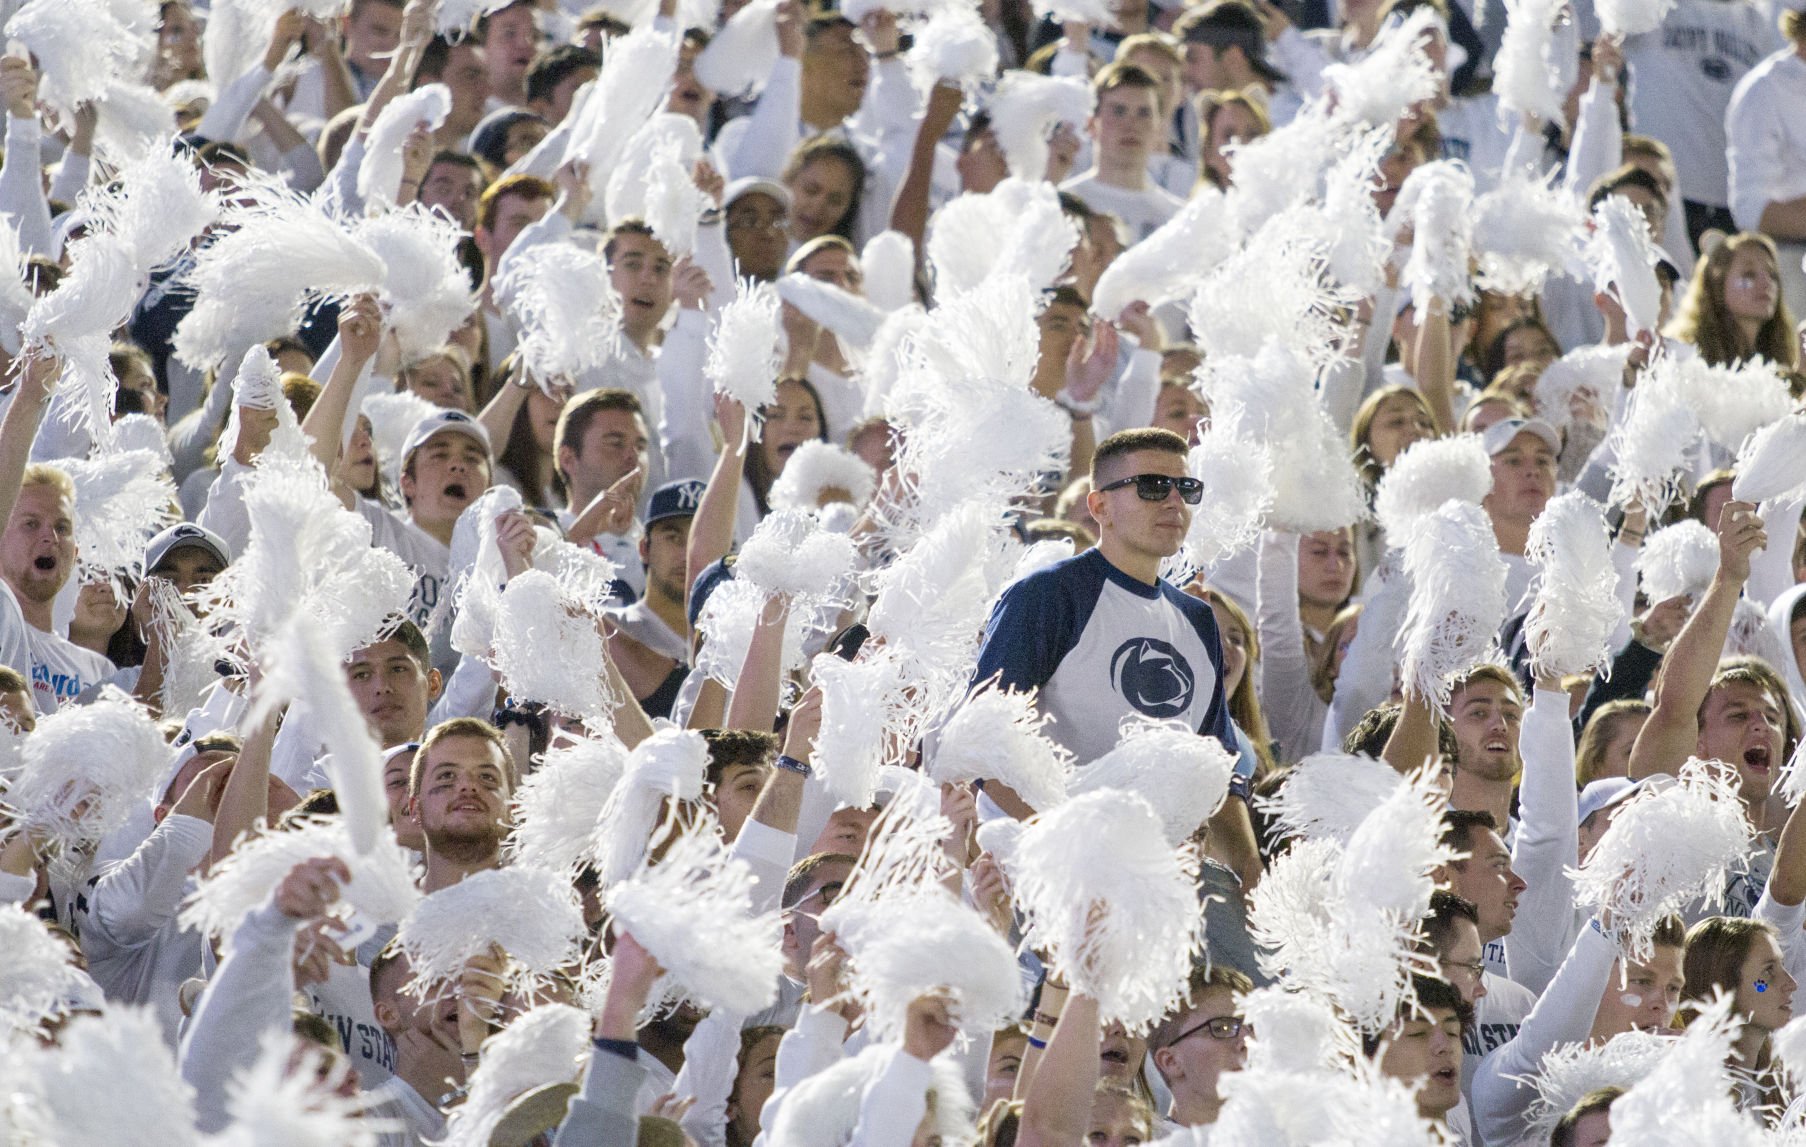 psu white out game 2018